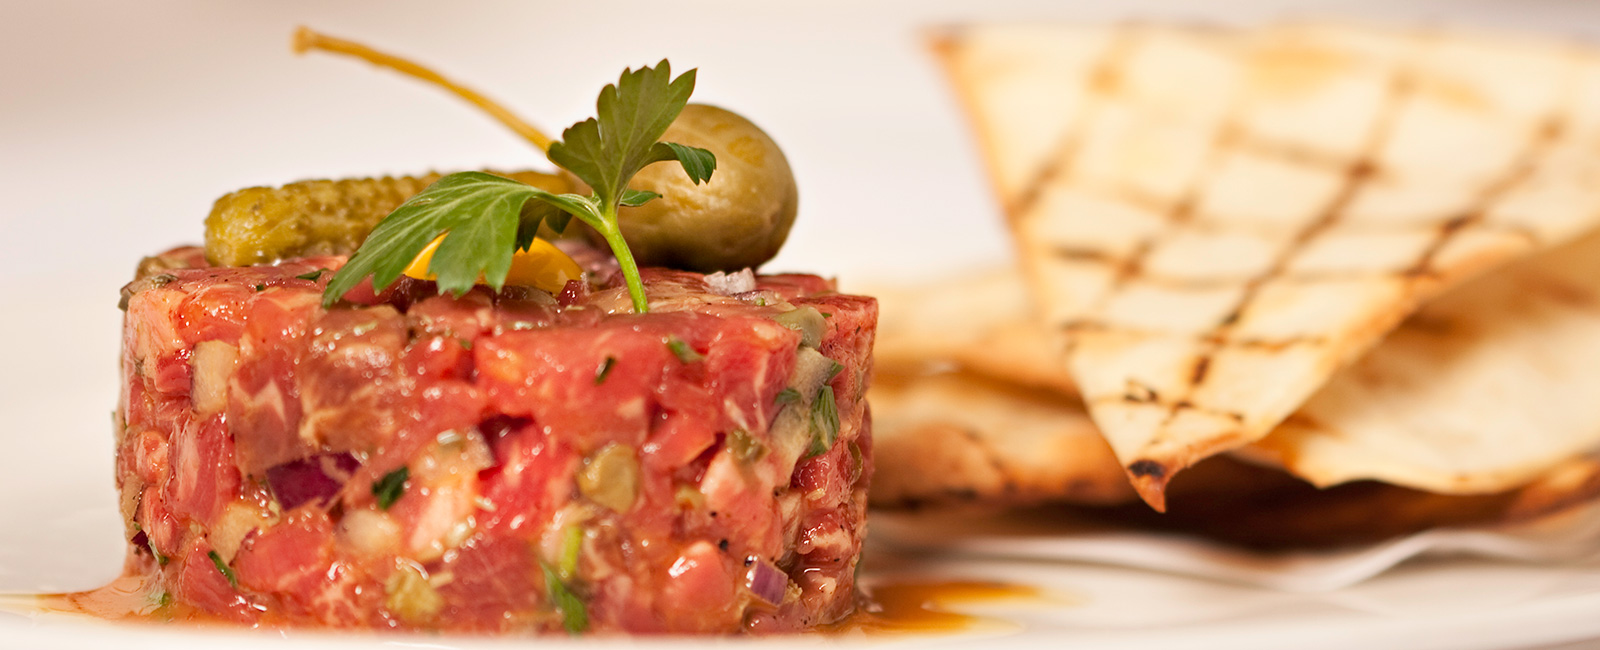 steak tartar with a green pickle and a green olive on top. Serviced with toasted pita bread